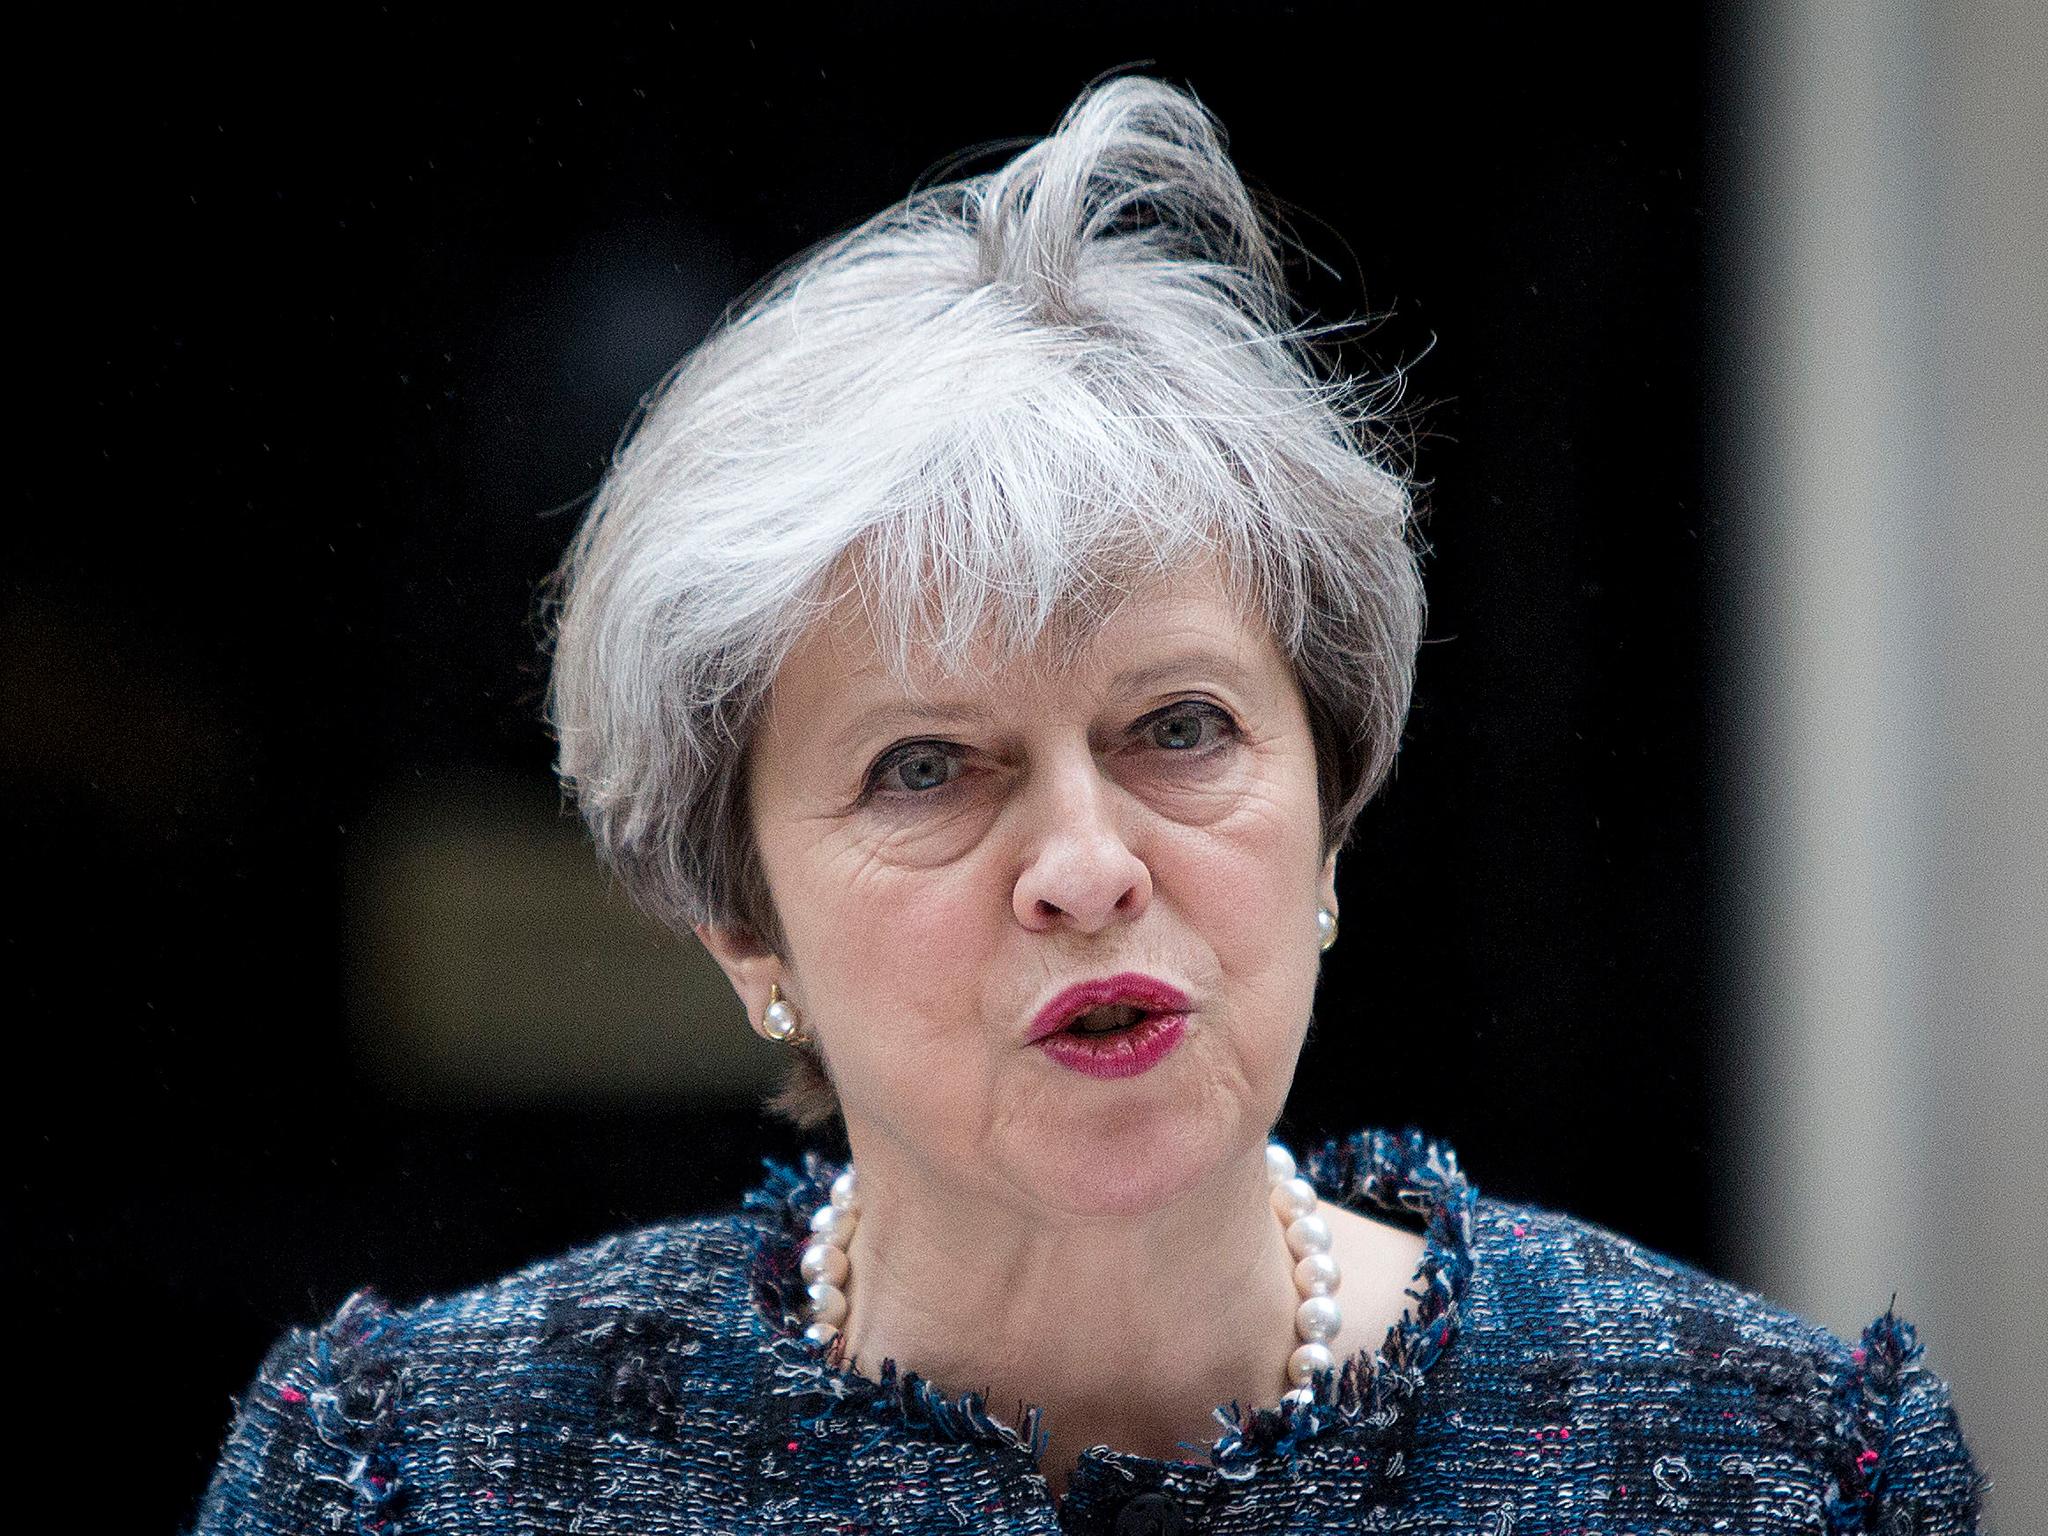 Ms May will chair a meeting of the Government's emergency Cobra committee on Tuesday